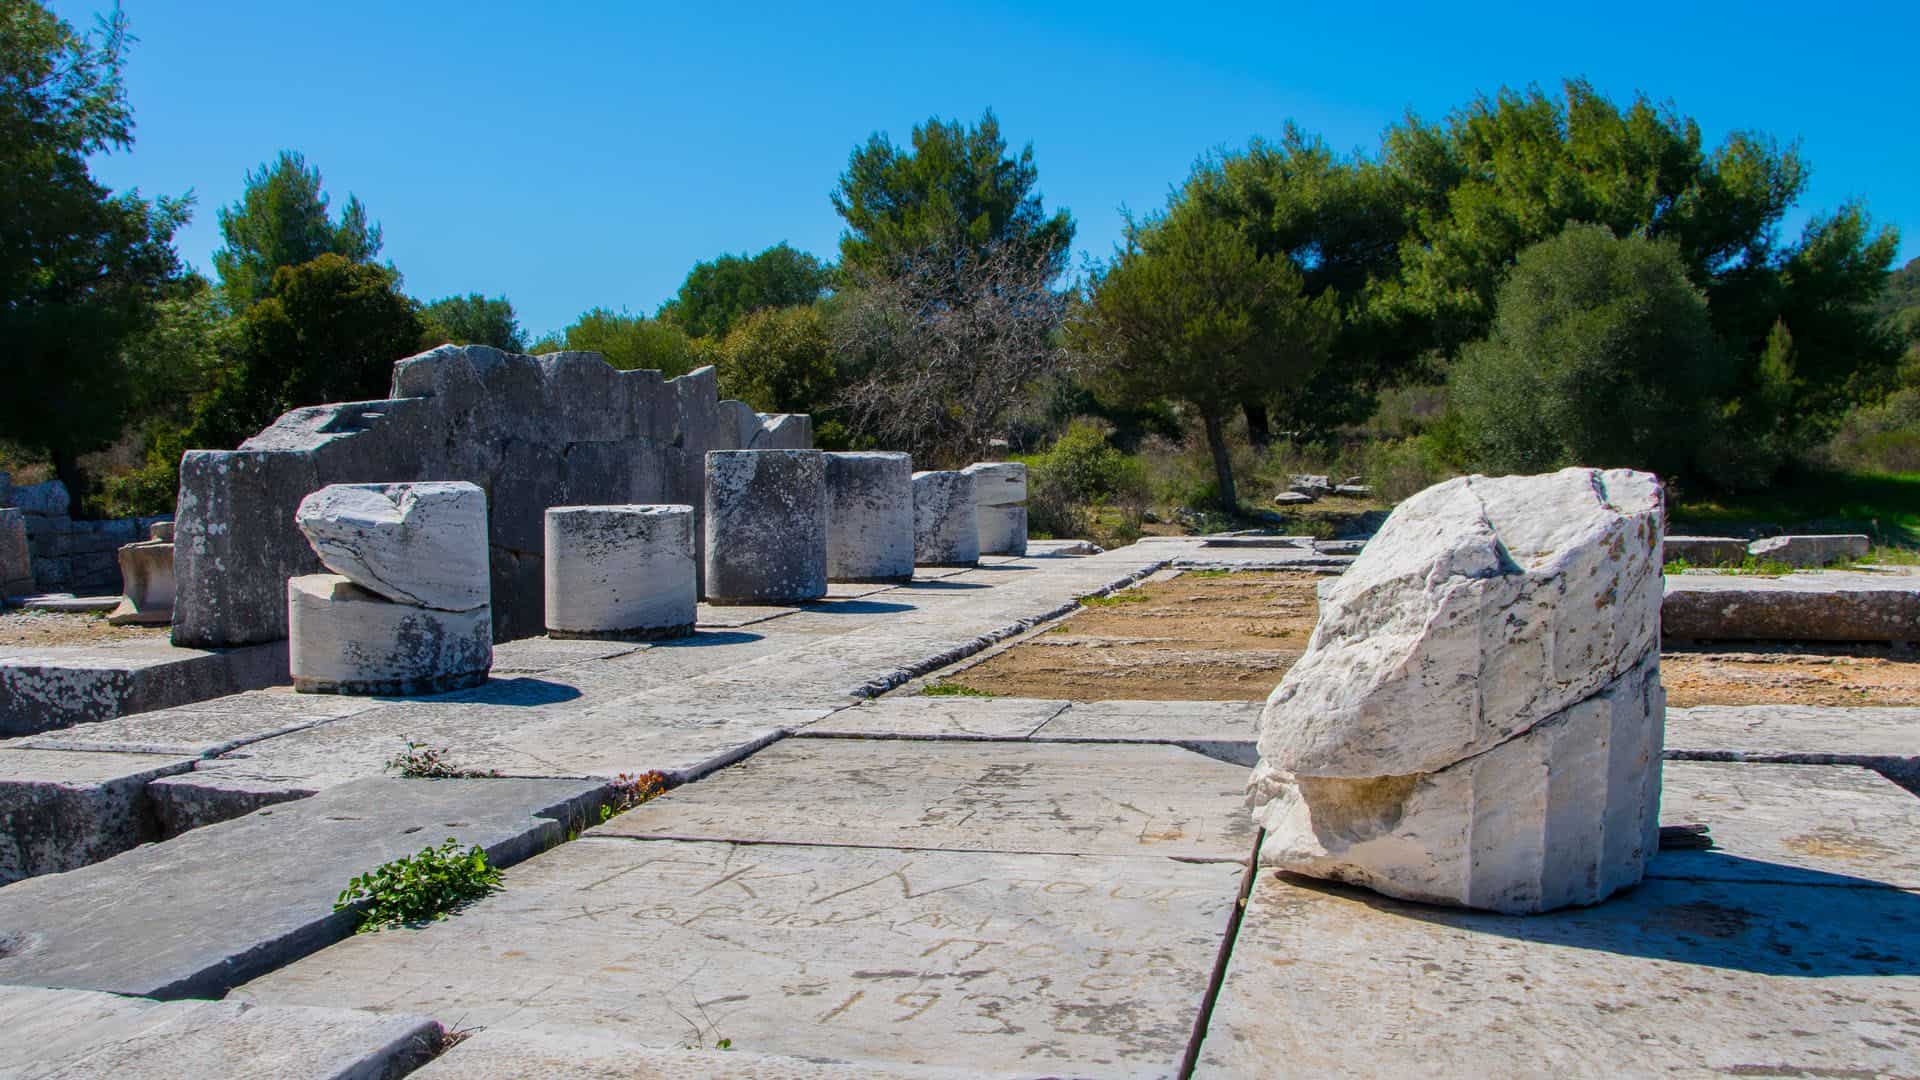 Ramnous archaeological site